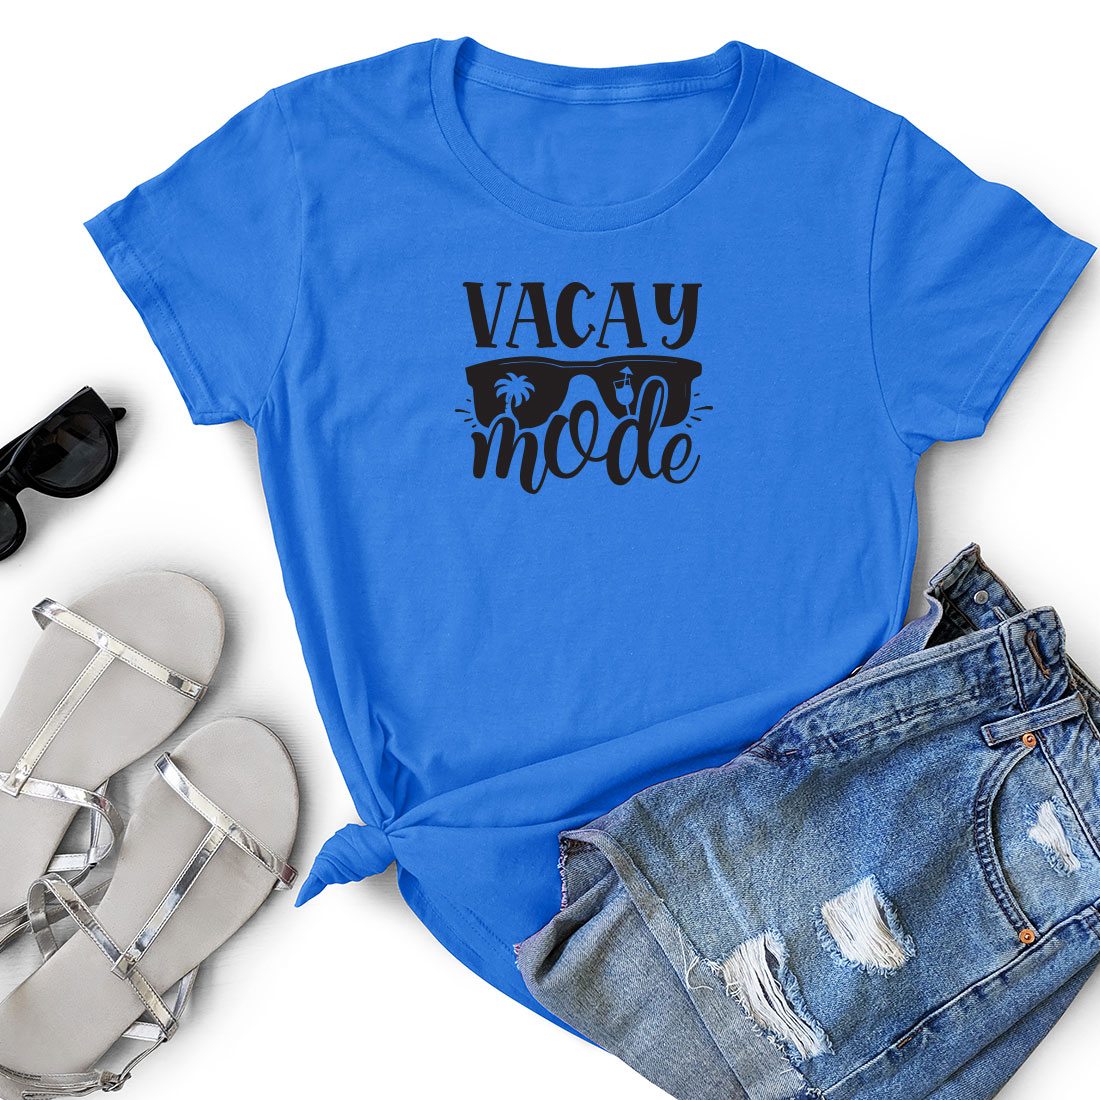 Blue shirt that says vacay mode next to a pair of shorts.